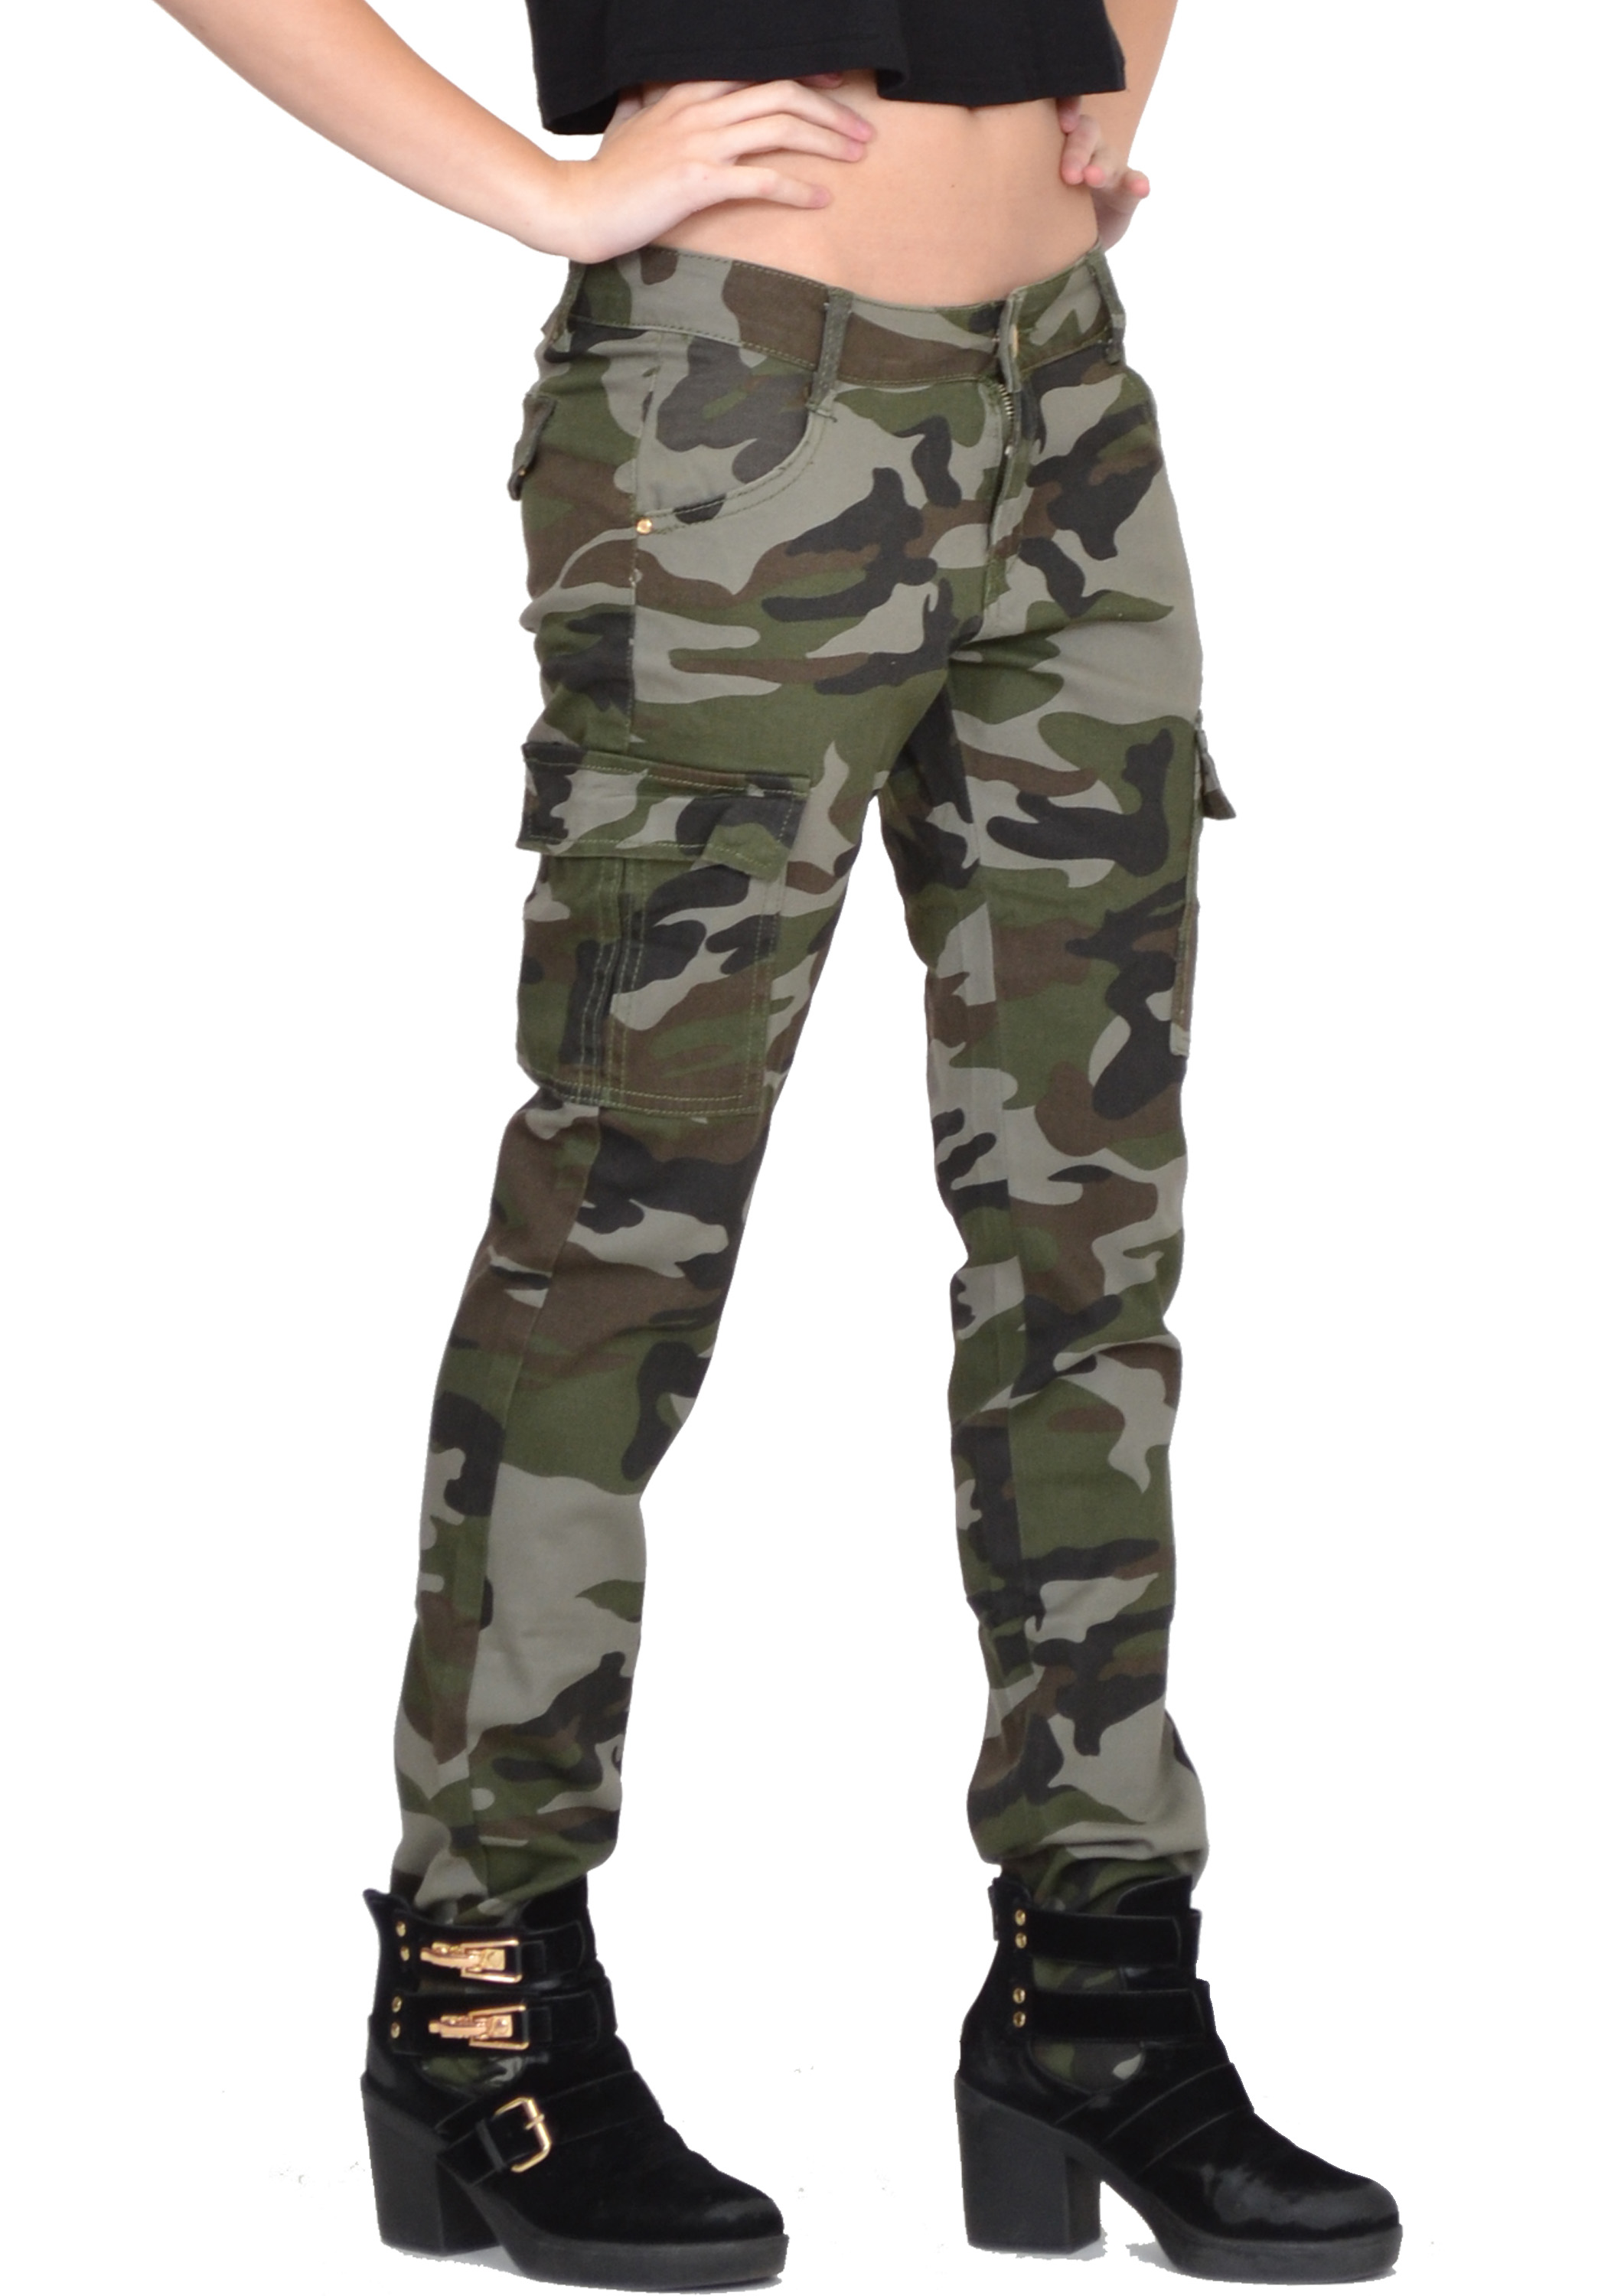 Womens Army Military Slim Stretch Green Camouflage Combat Pants Cargo ...